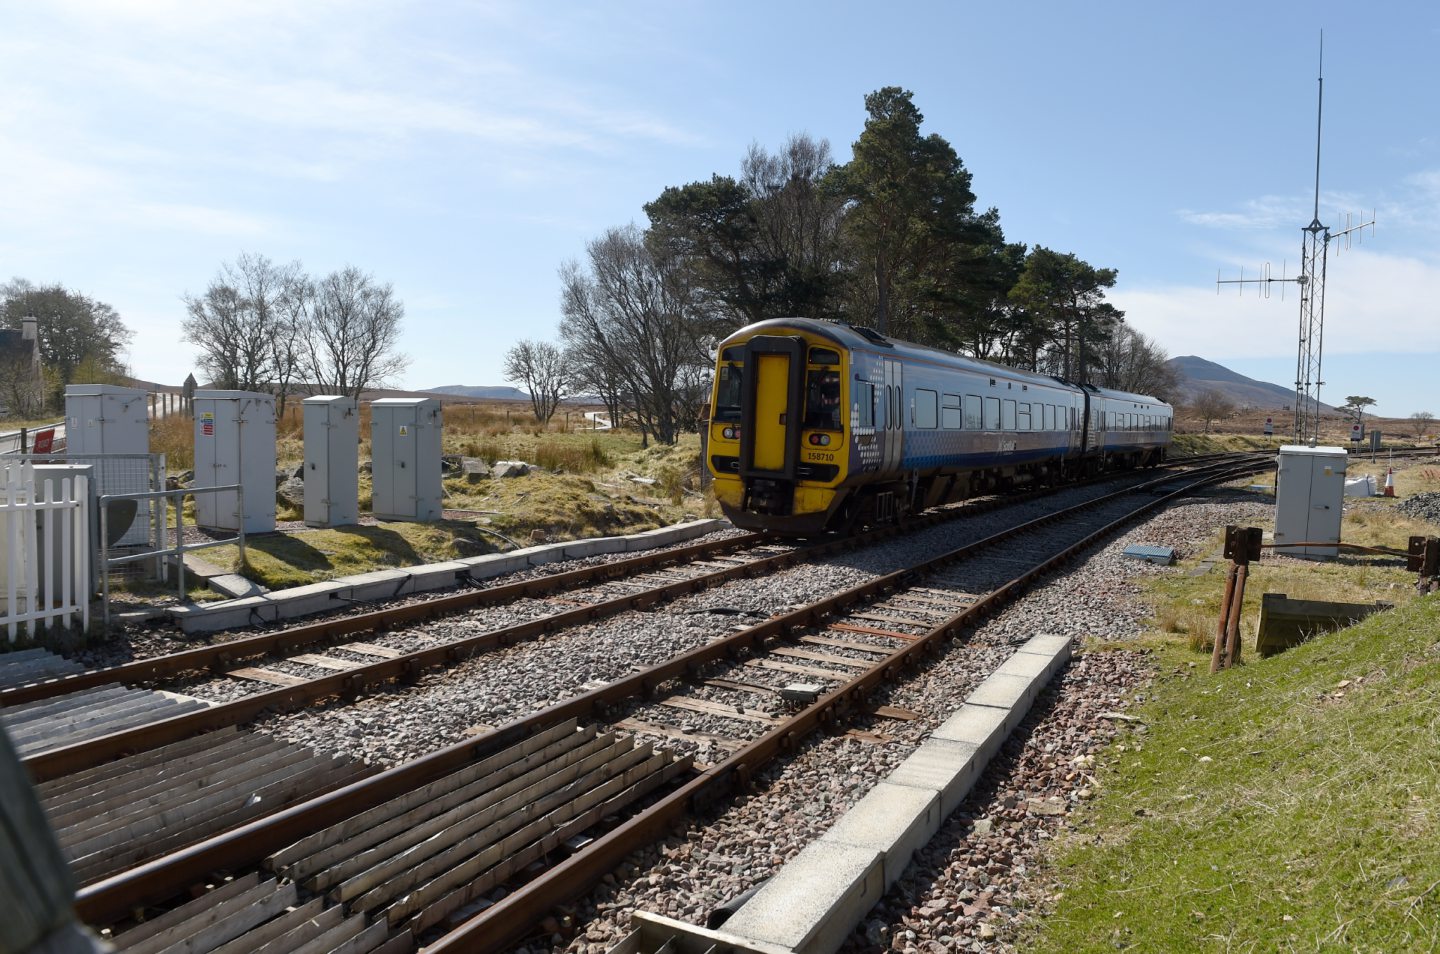 Scotrail train services are being cut across the country